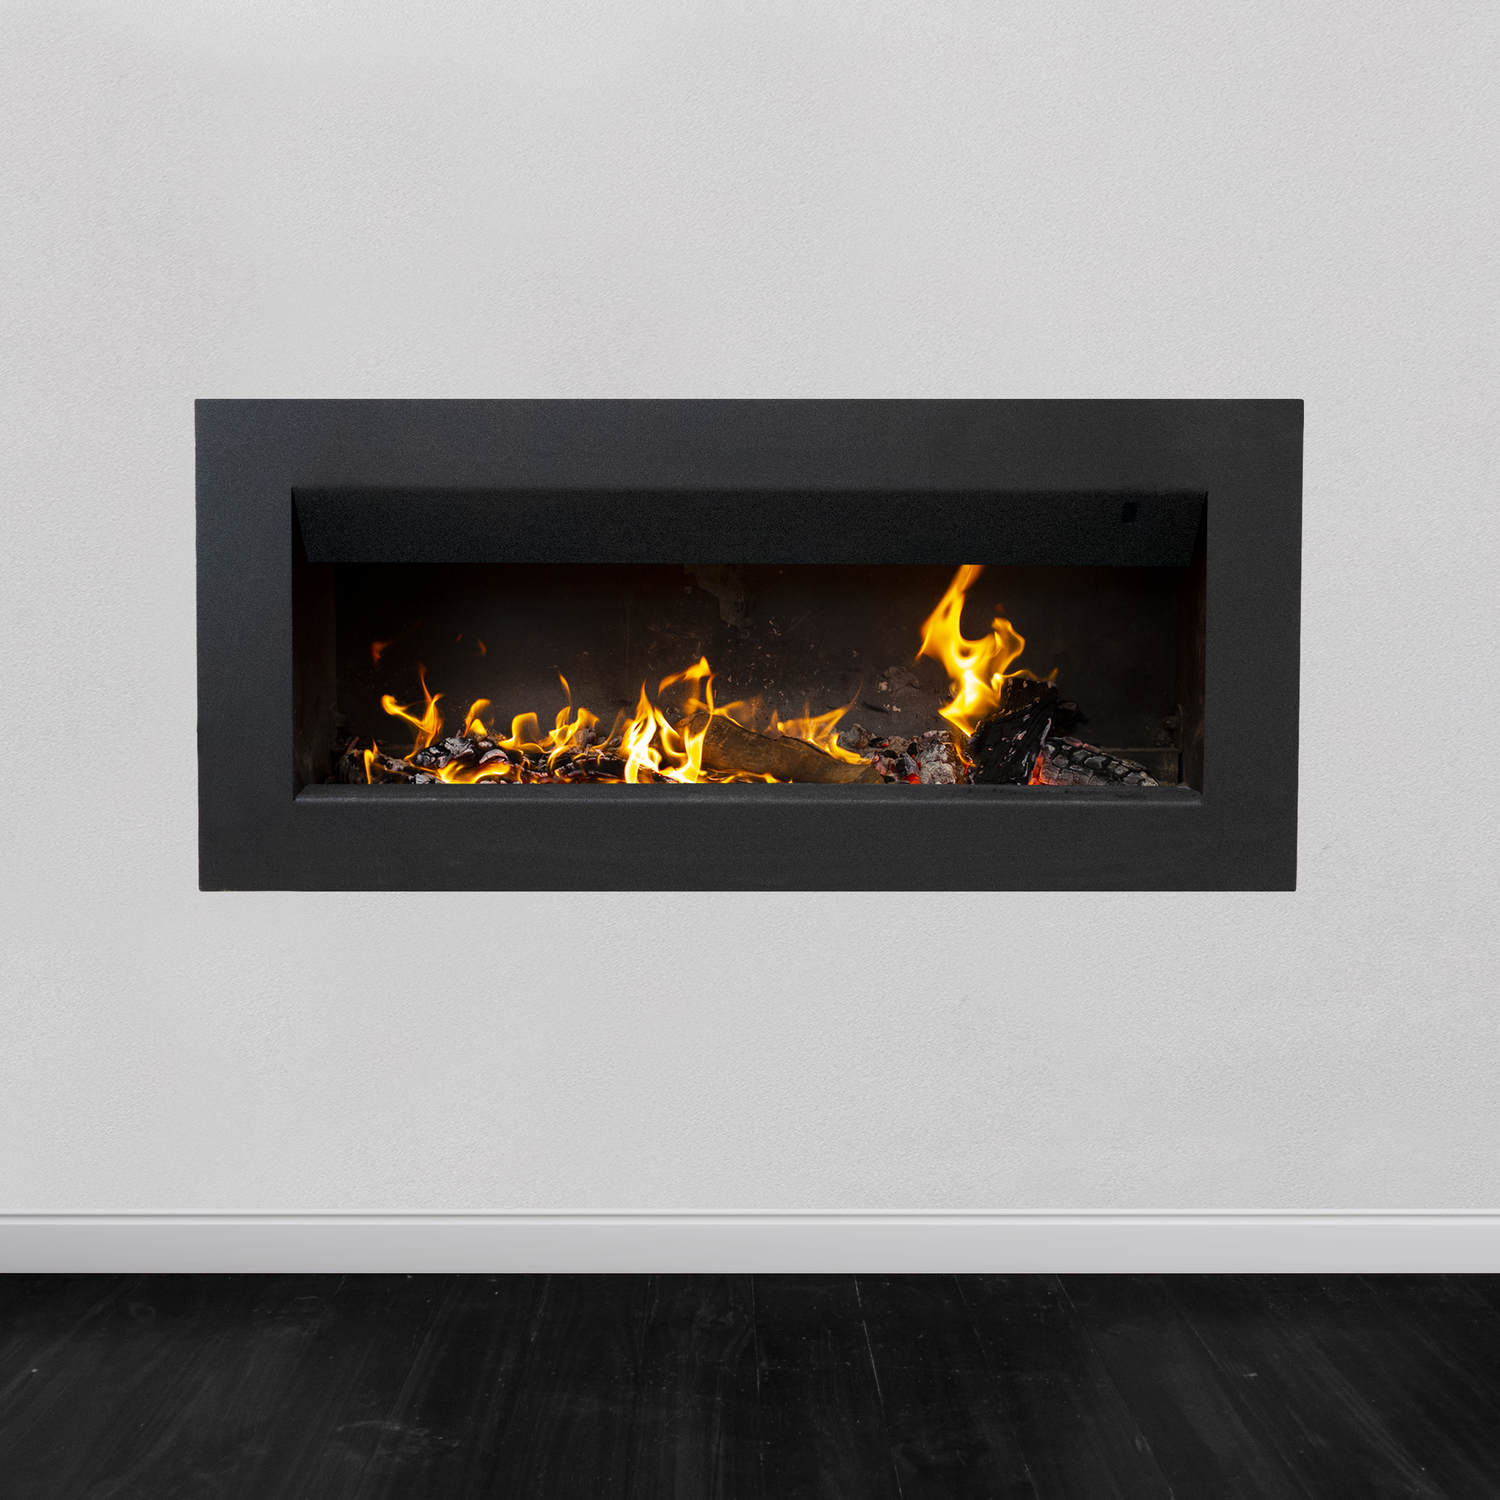 Fireplace oven - The Woodfired Co